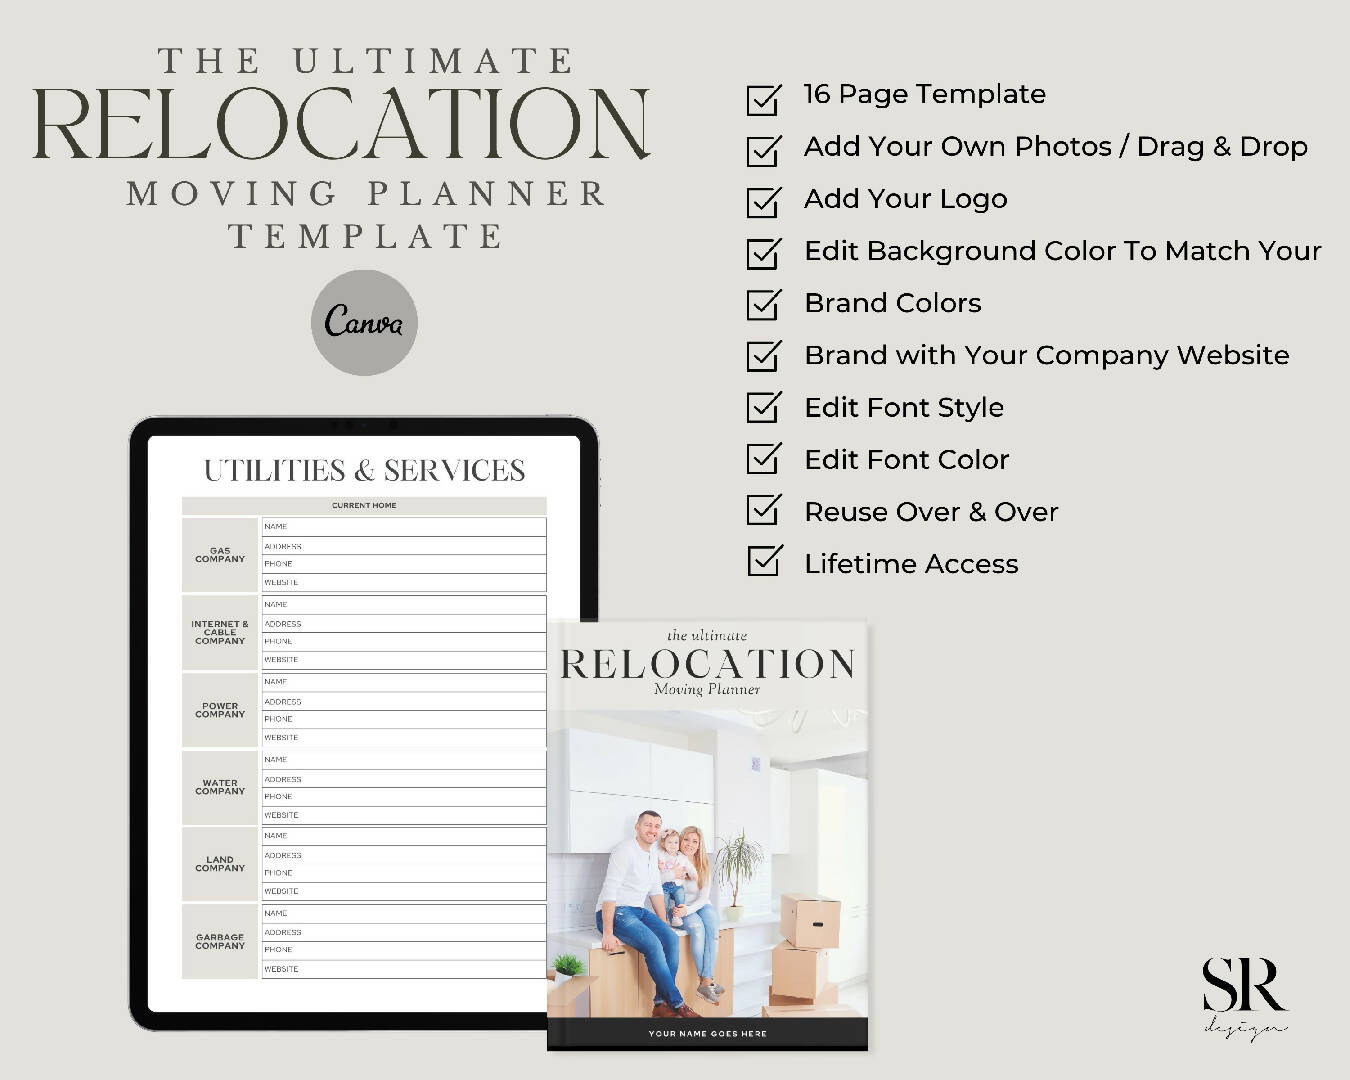 Moving Relocation Planner Template.jpg